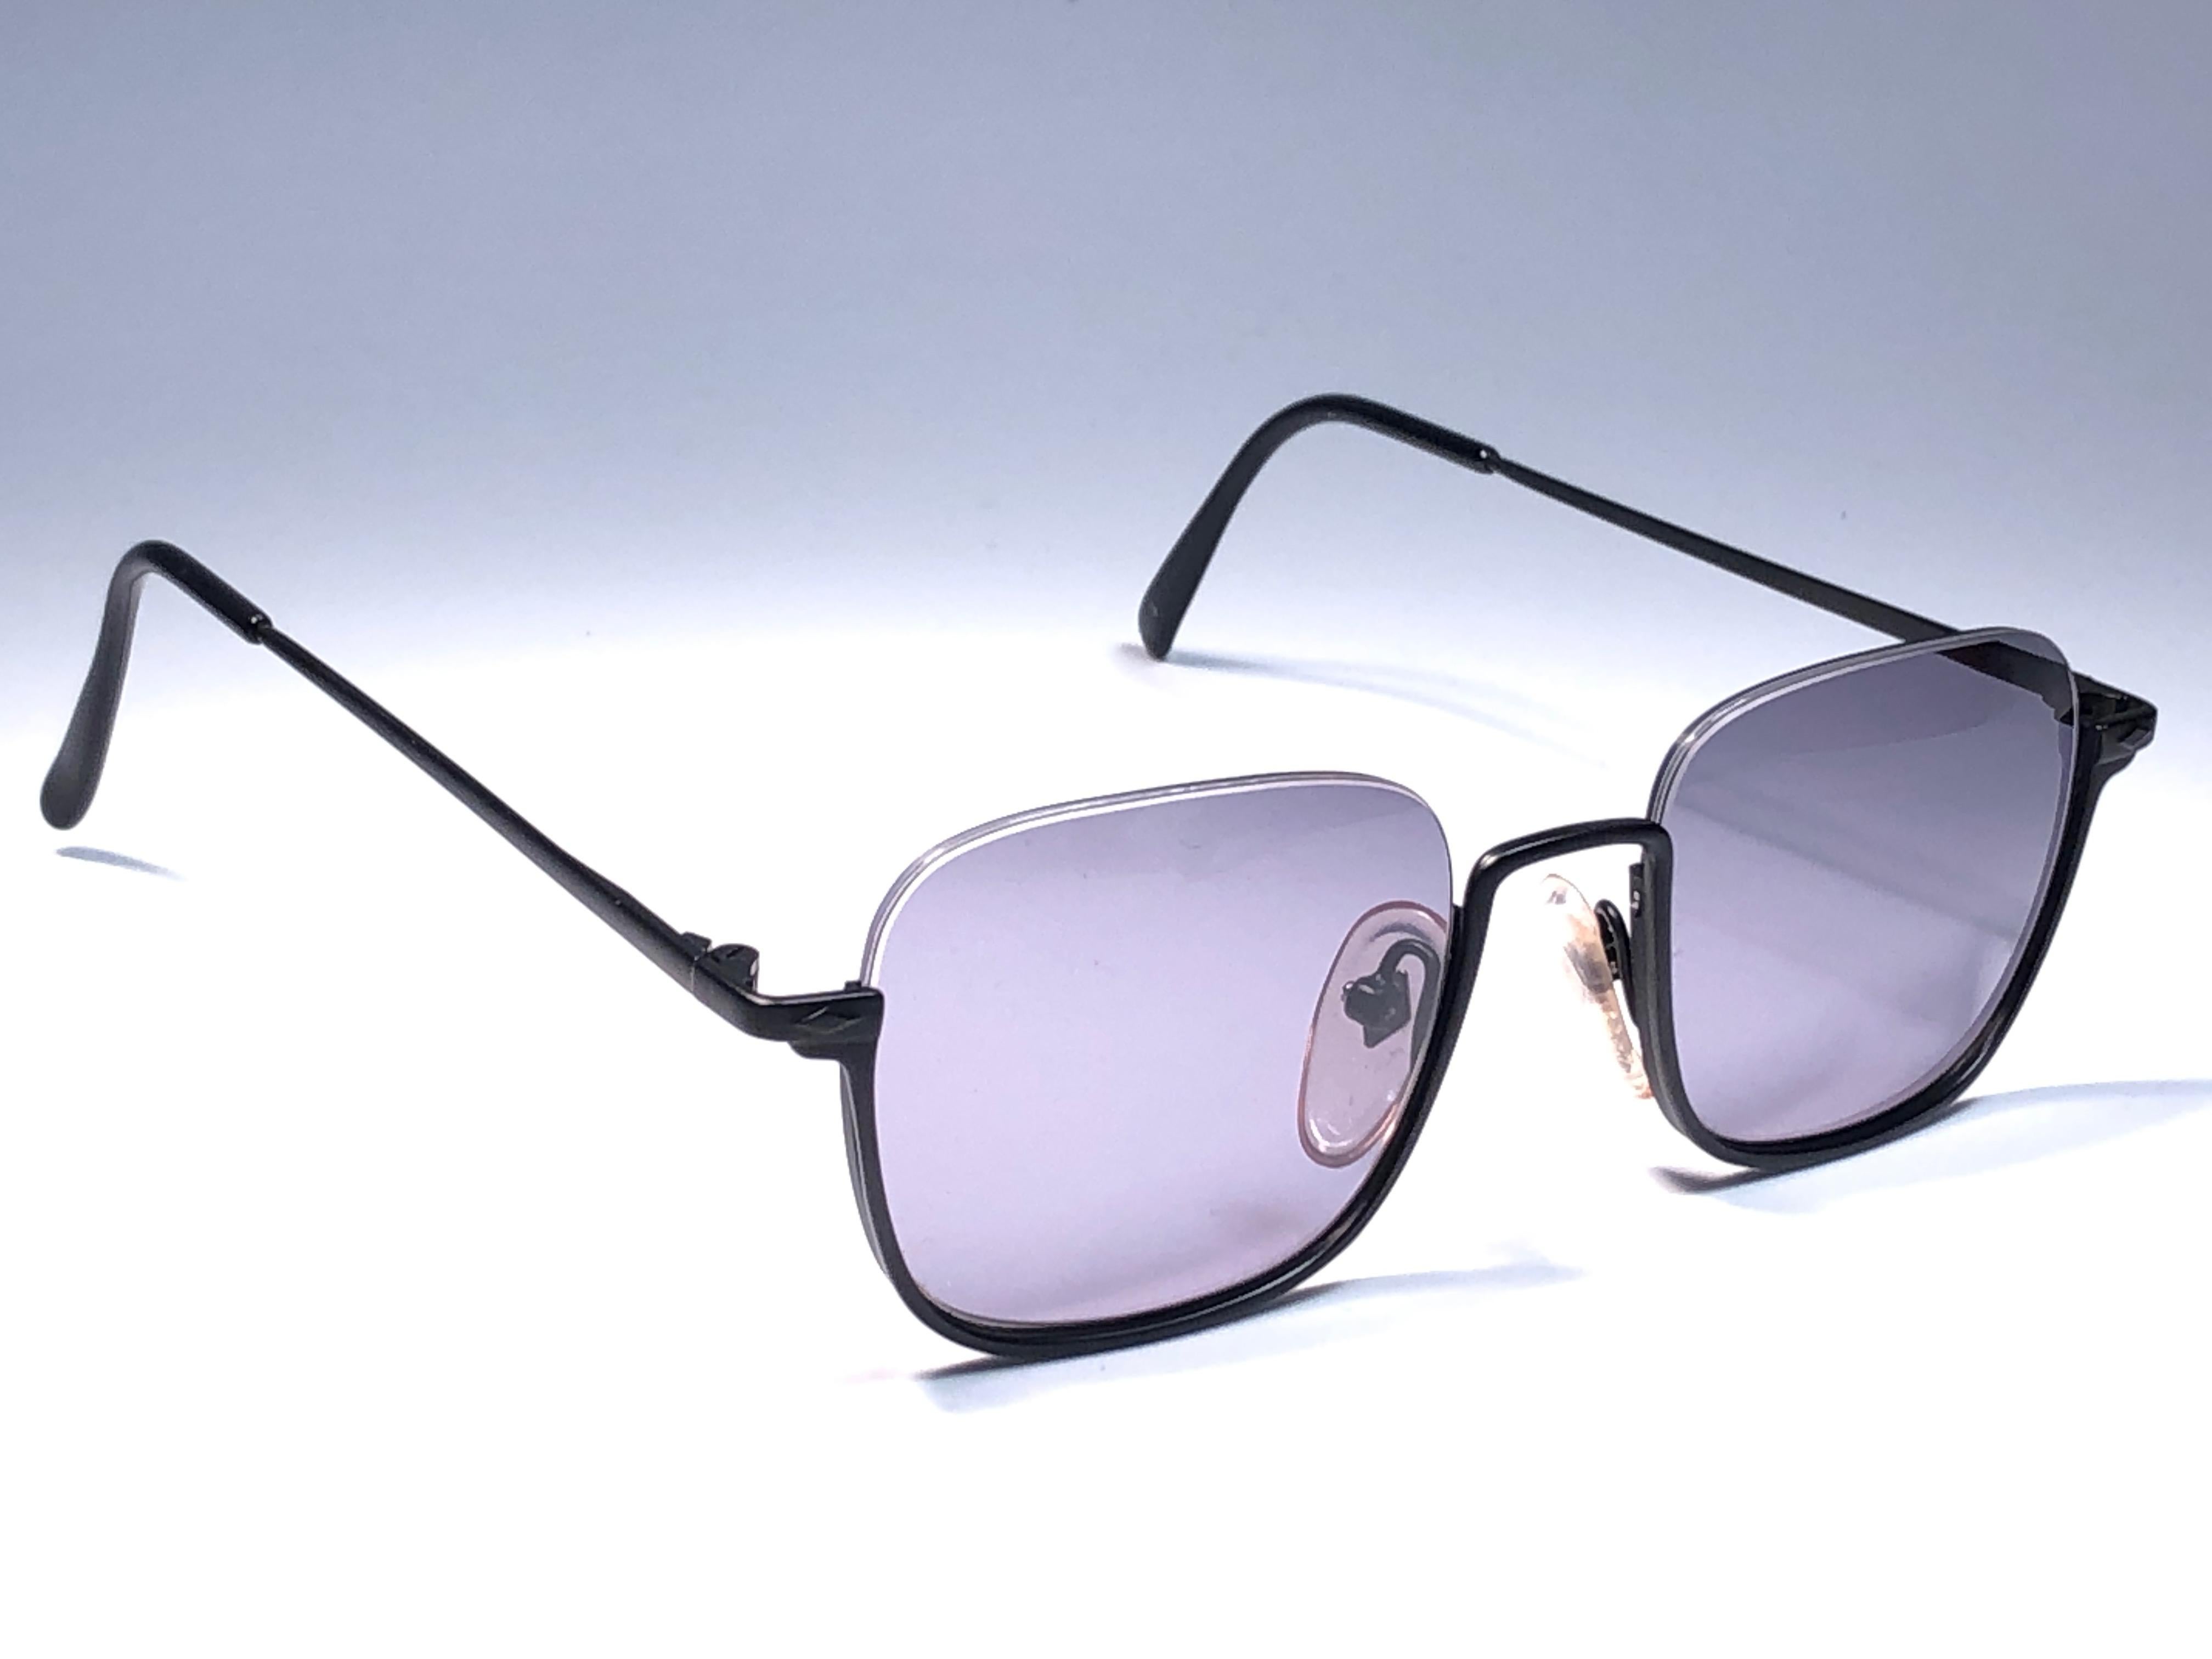 New Jean Paul Gaultier 55 7161 Half Frame Sunglasses 1990's Made in Japan  For Sale 2